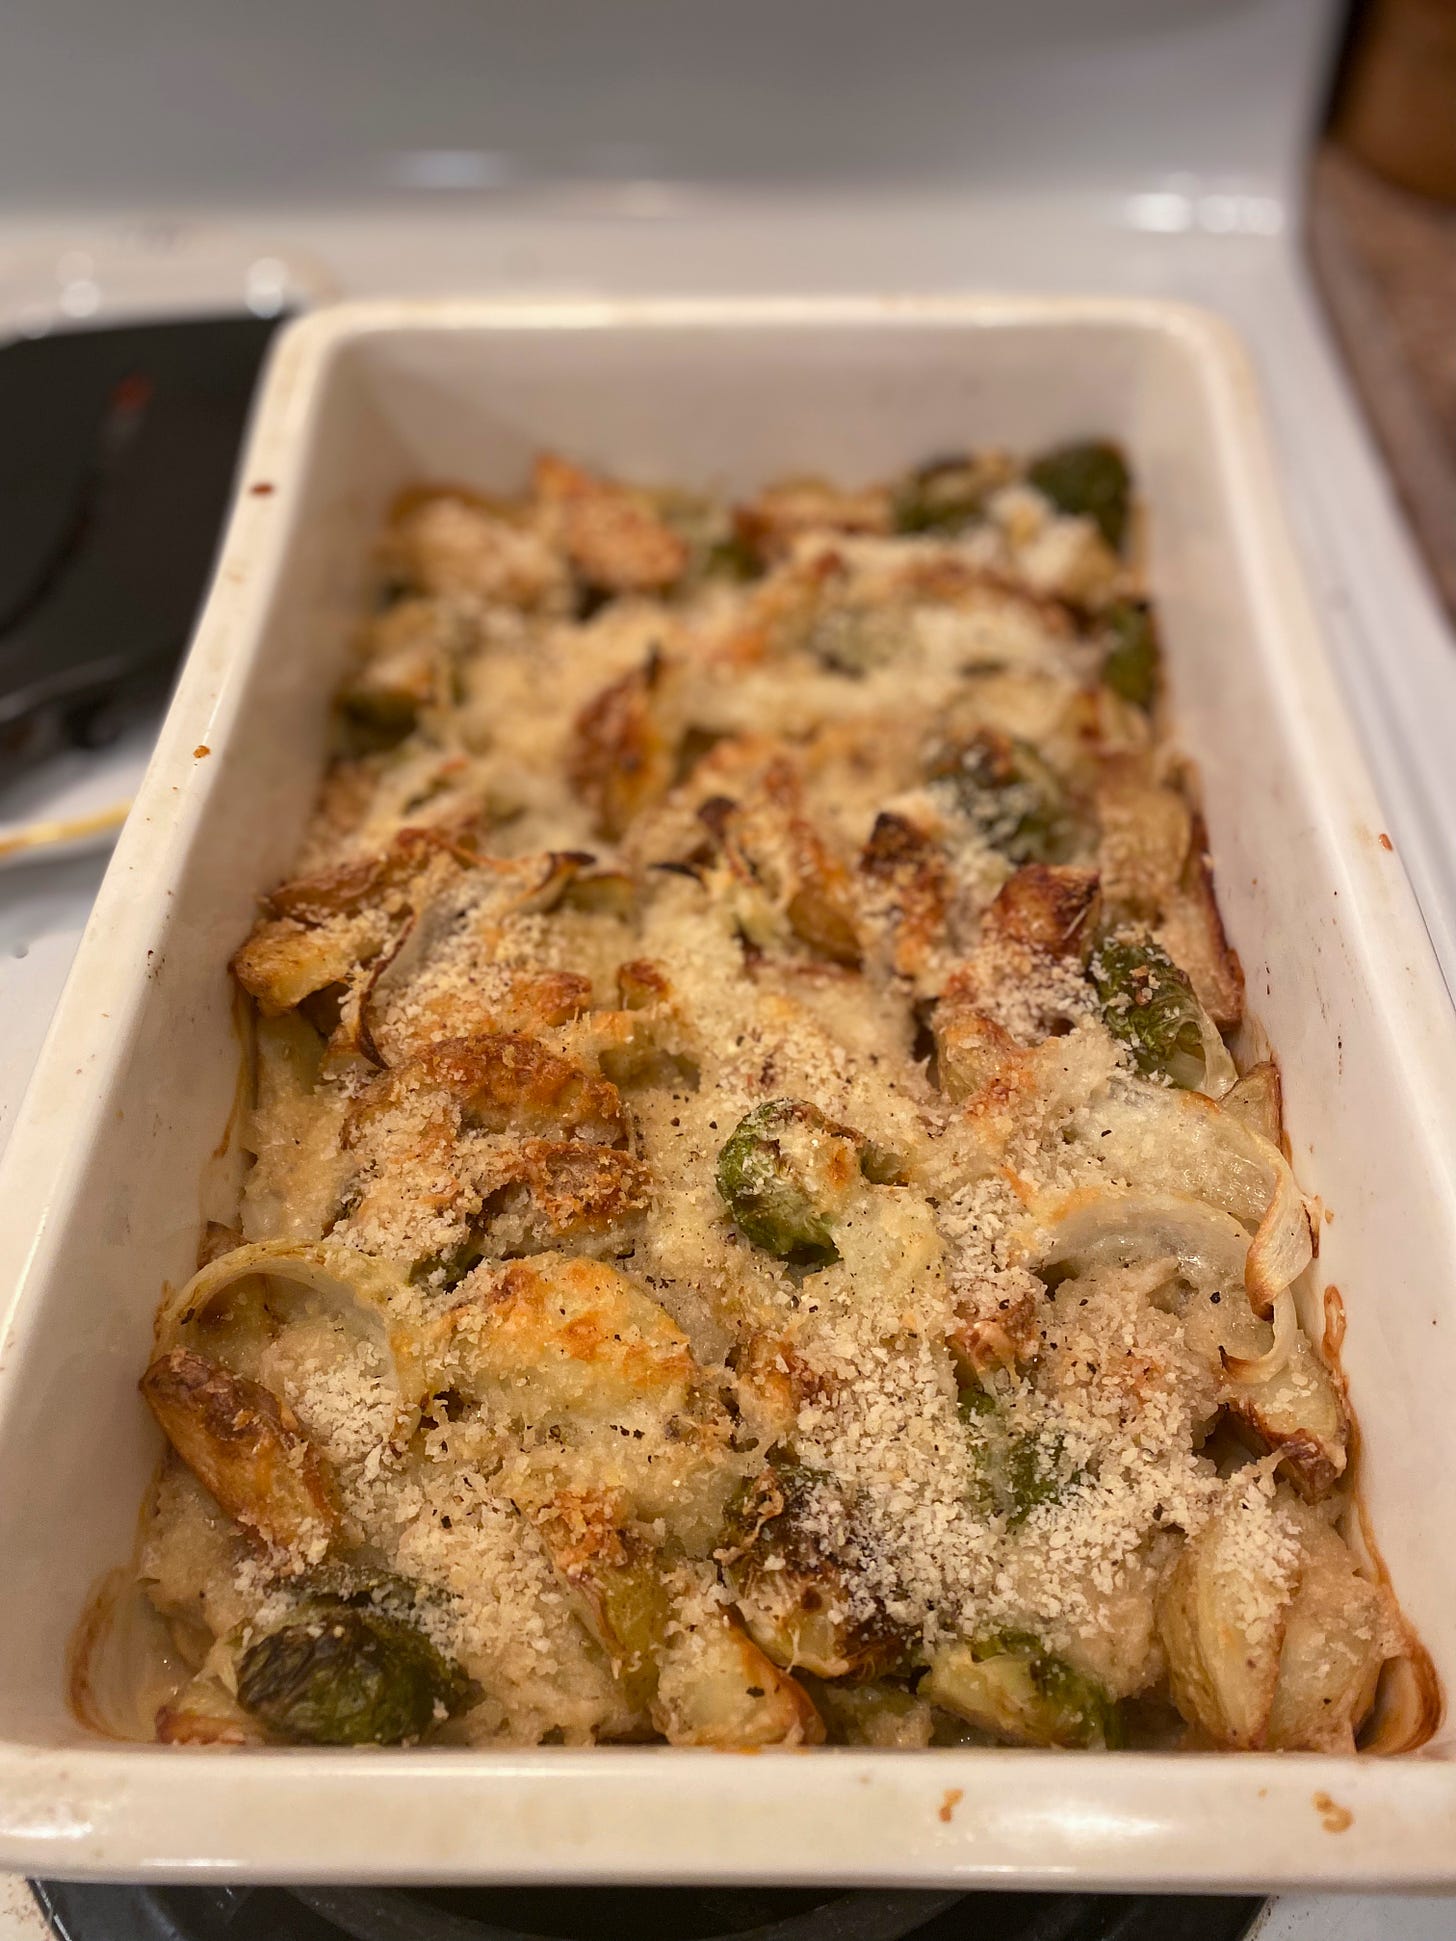 A white rectangular baking dish on top of the stuff, full of roasted wedges of potatoes and brussels sprout halves covered in cheese and breadcrumbs.